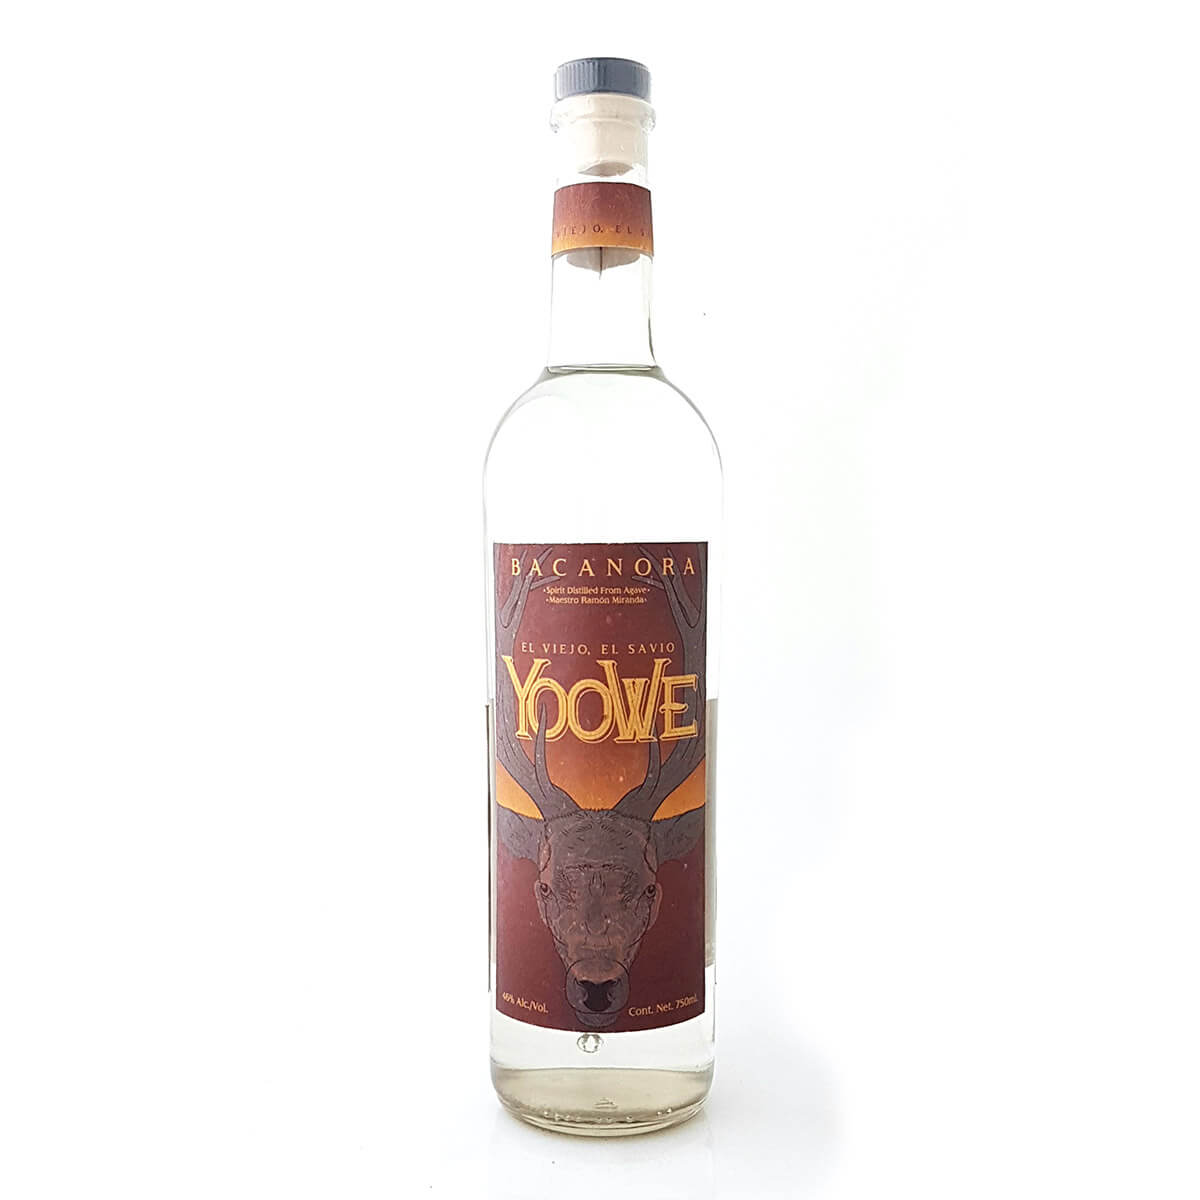 Yoowe Bacanora is made in the state of Sonora, the far north west of Mexico. Made exclusively from Maguey Pacifica (Agave Angustifolia), which is also known as Yaquiana locally. Bacanora is strictly made to specifications just like tequila, one type of agave, from a specific region and under a specific process. Yoowe brings you this tradition.